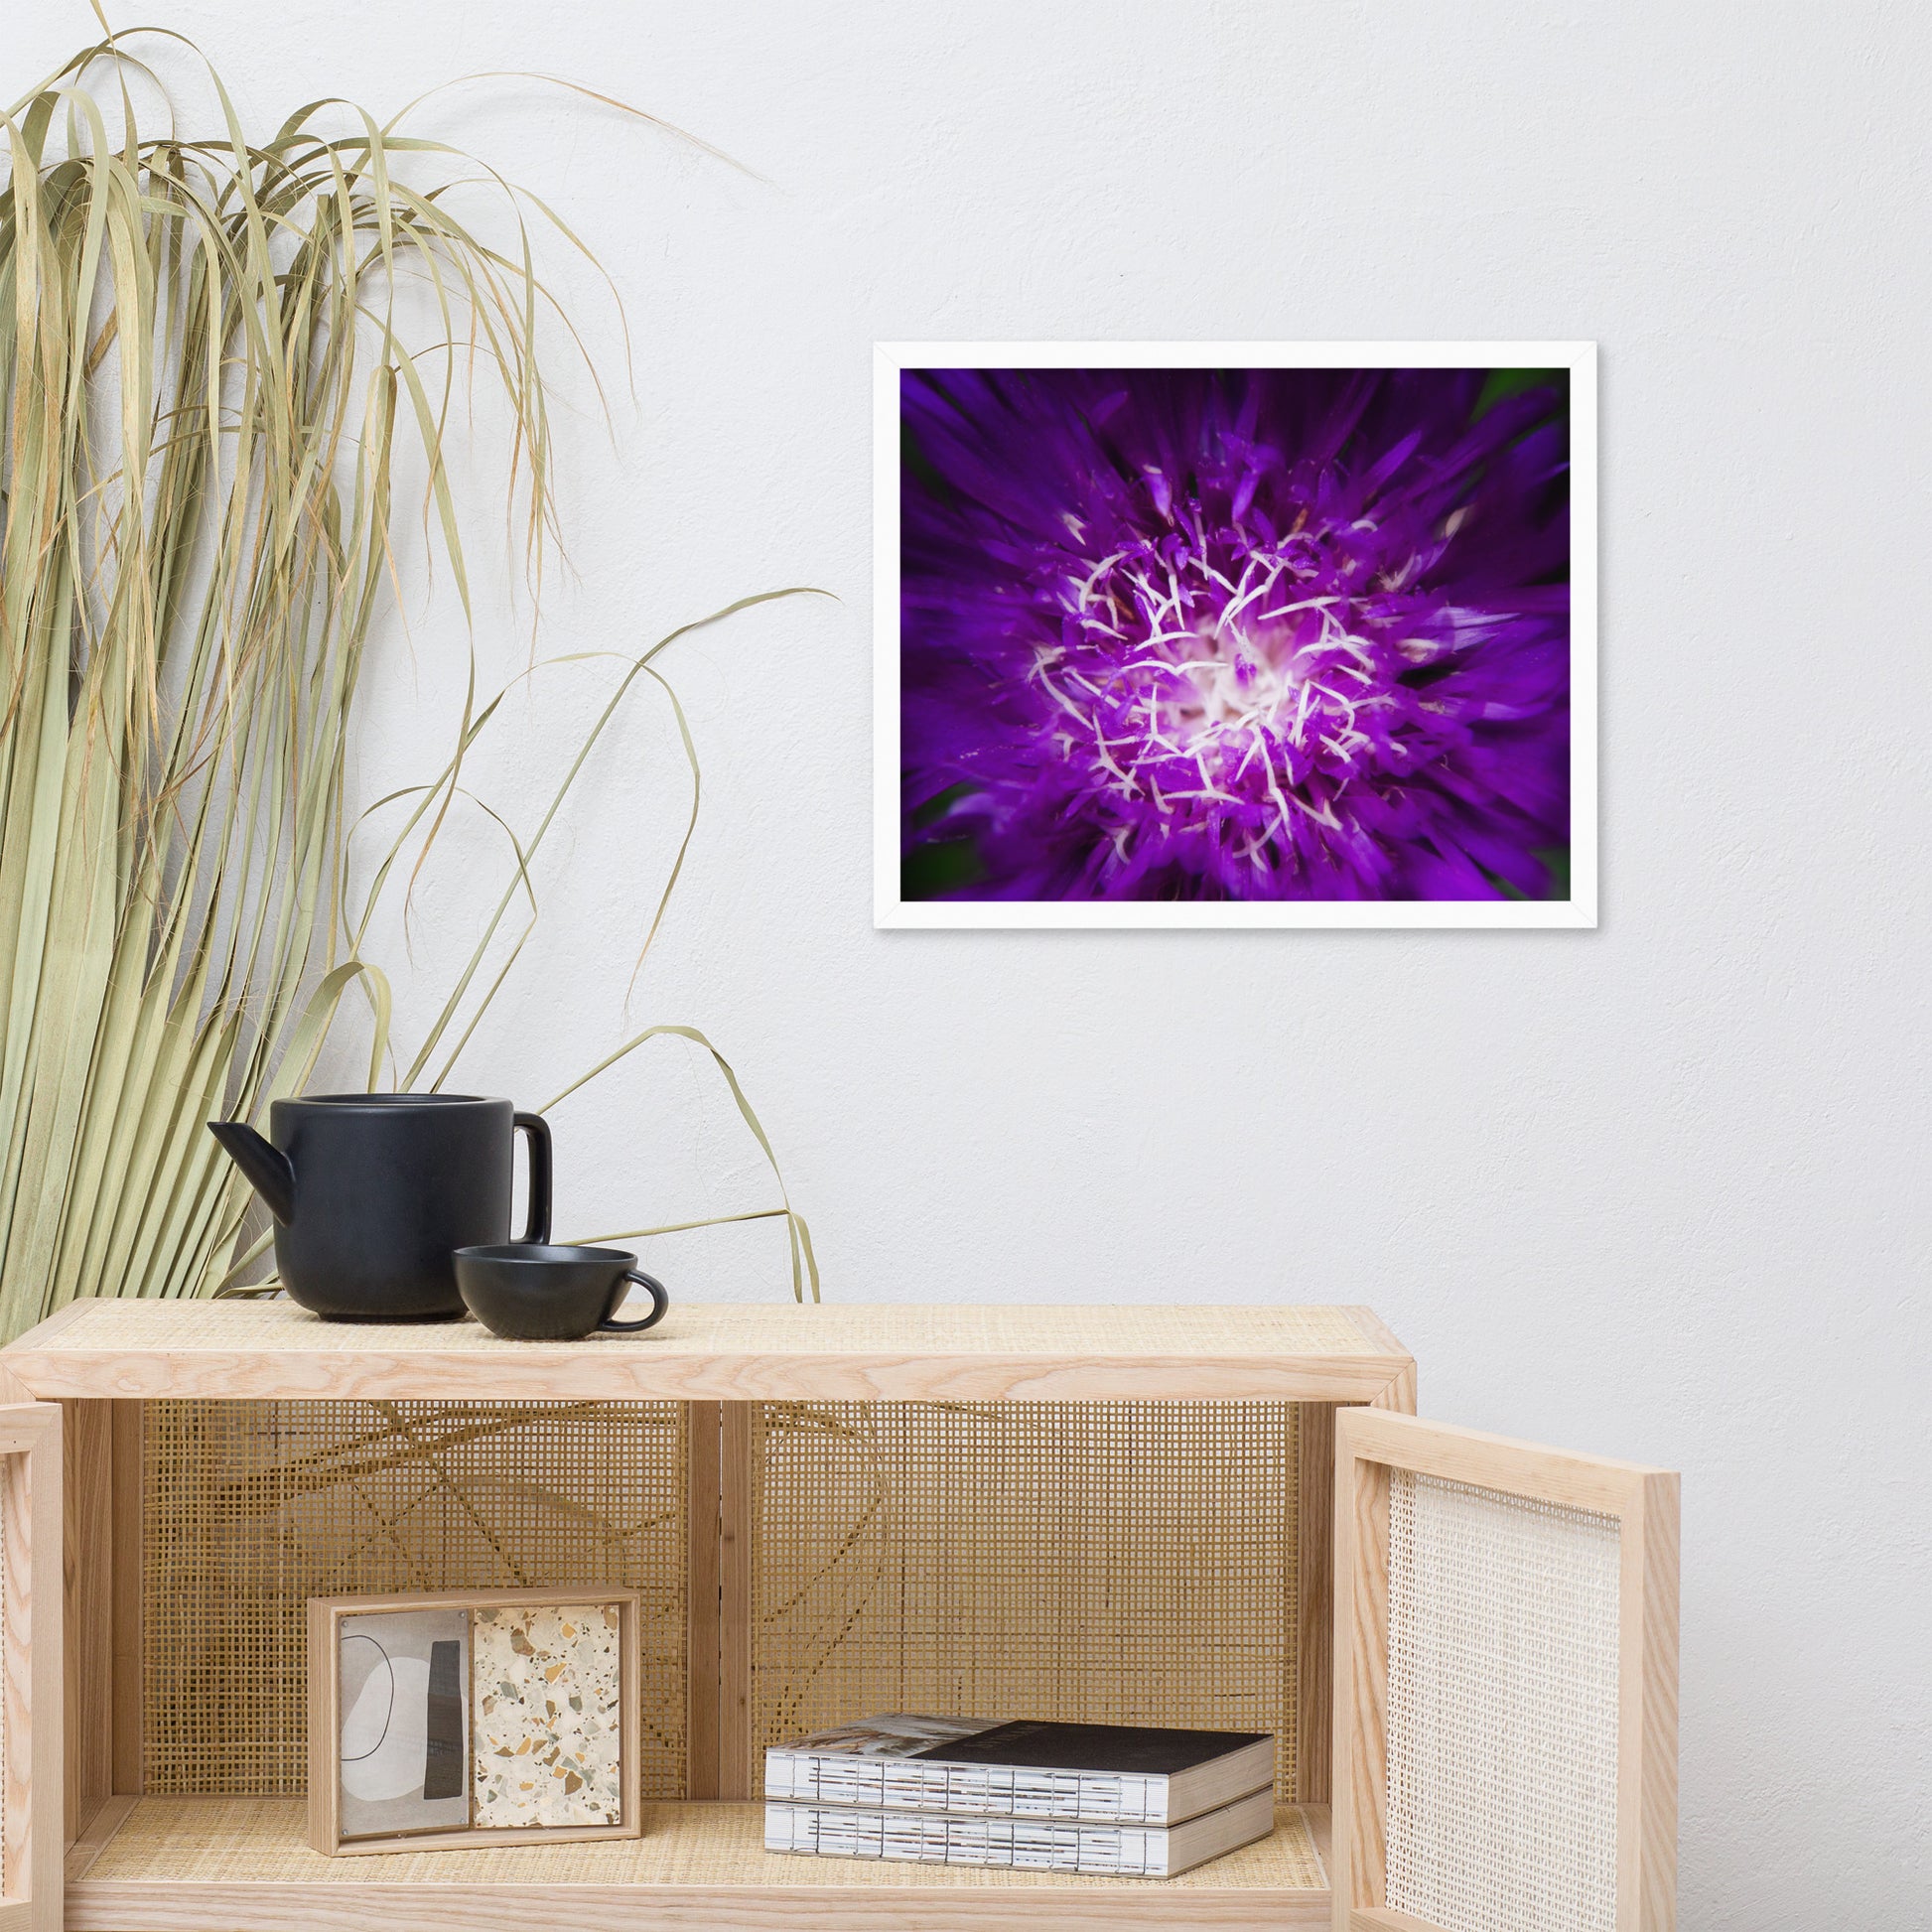 Purple Pictures For Living Room: Purple Abstract Flower - Botanical / Floral / Flora / Flowers / Nature Photograph Framed Wall Art Print - Artwork - Wall Decor